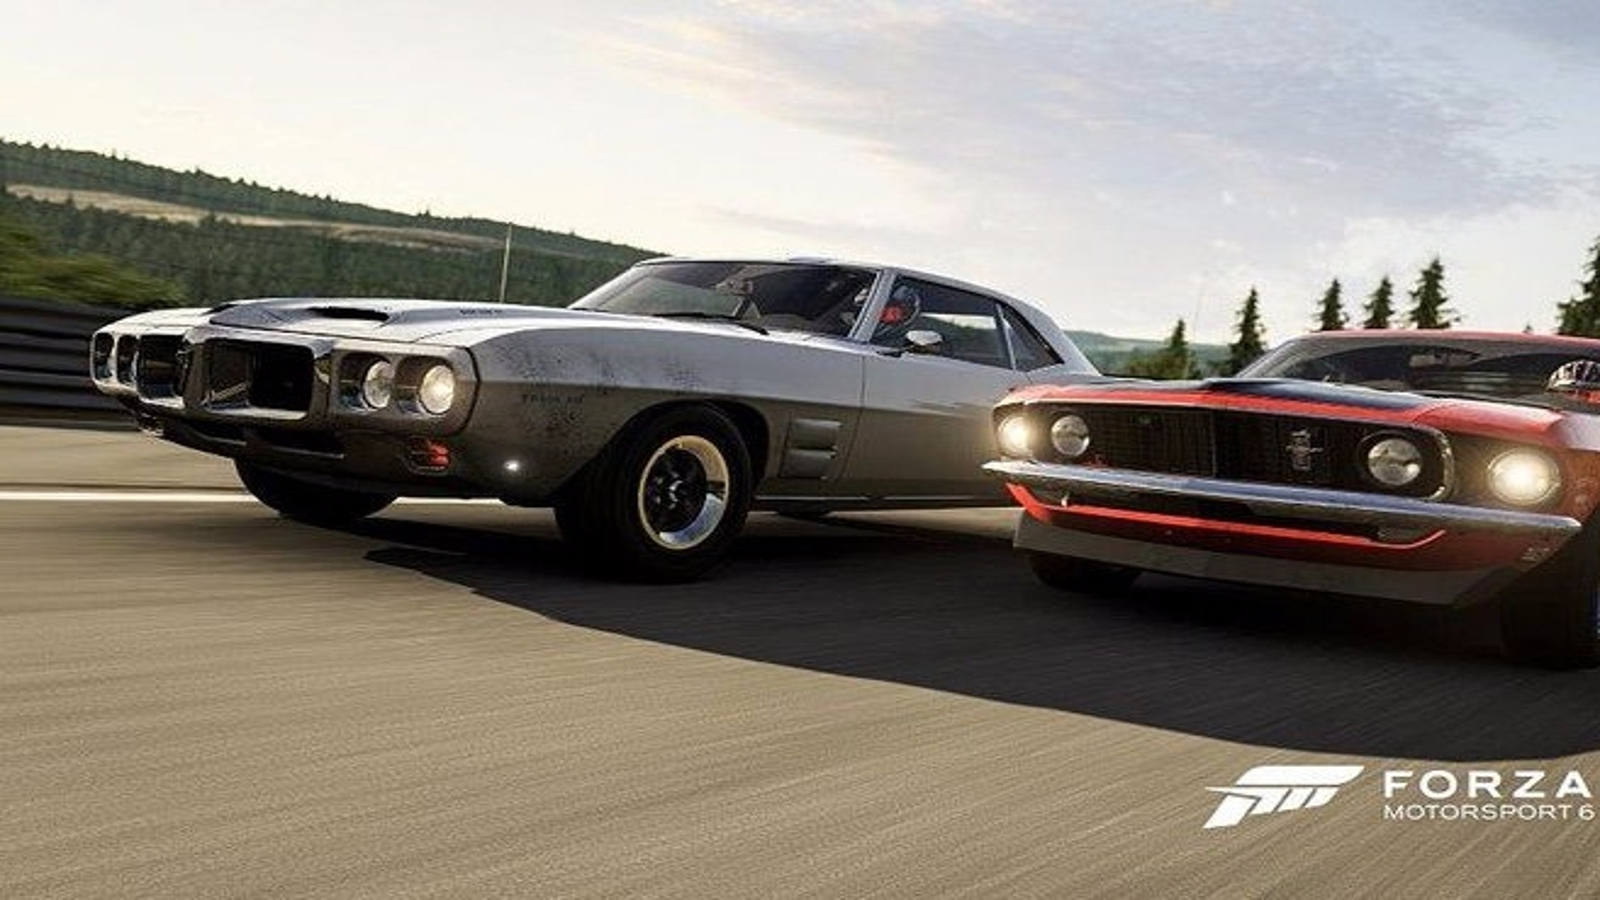 Forza Motorsport gameplay demo showcased, availability reaffirmed